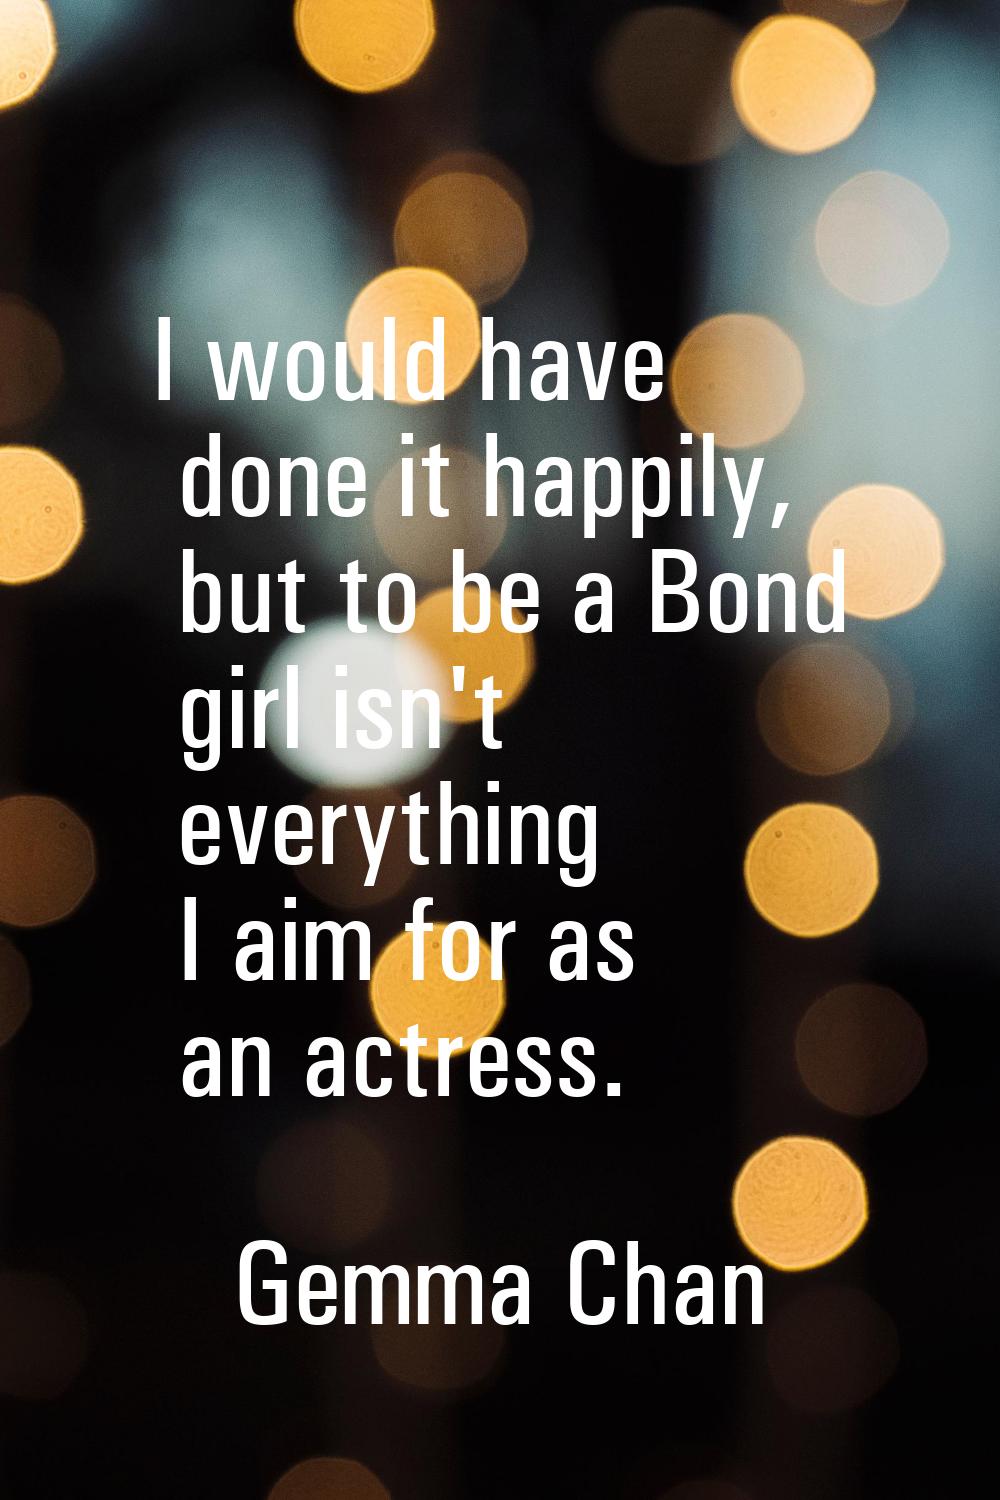 I would have done it happily, but to be a Bond girl isn't everything I aim for as an actress.